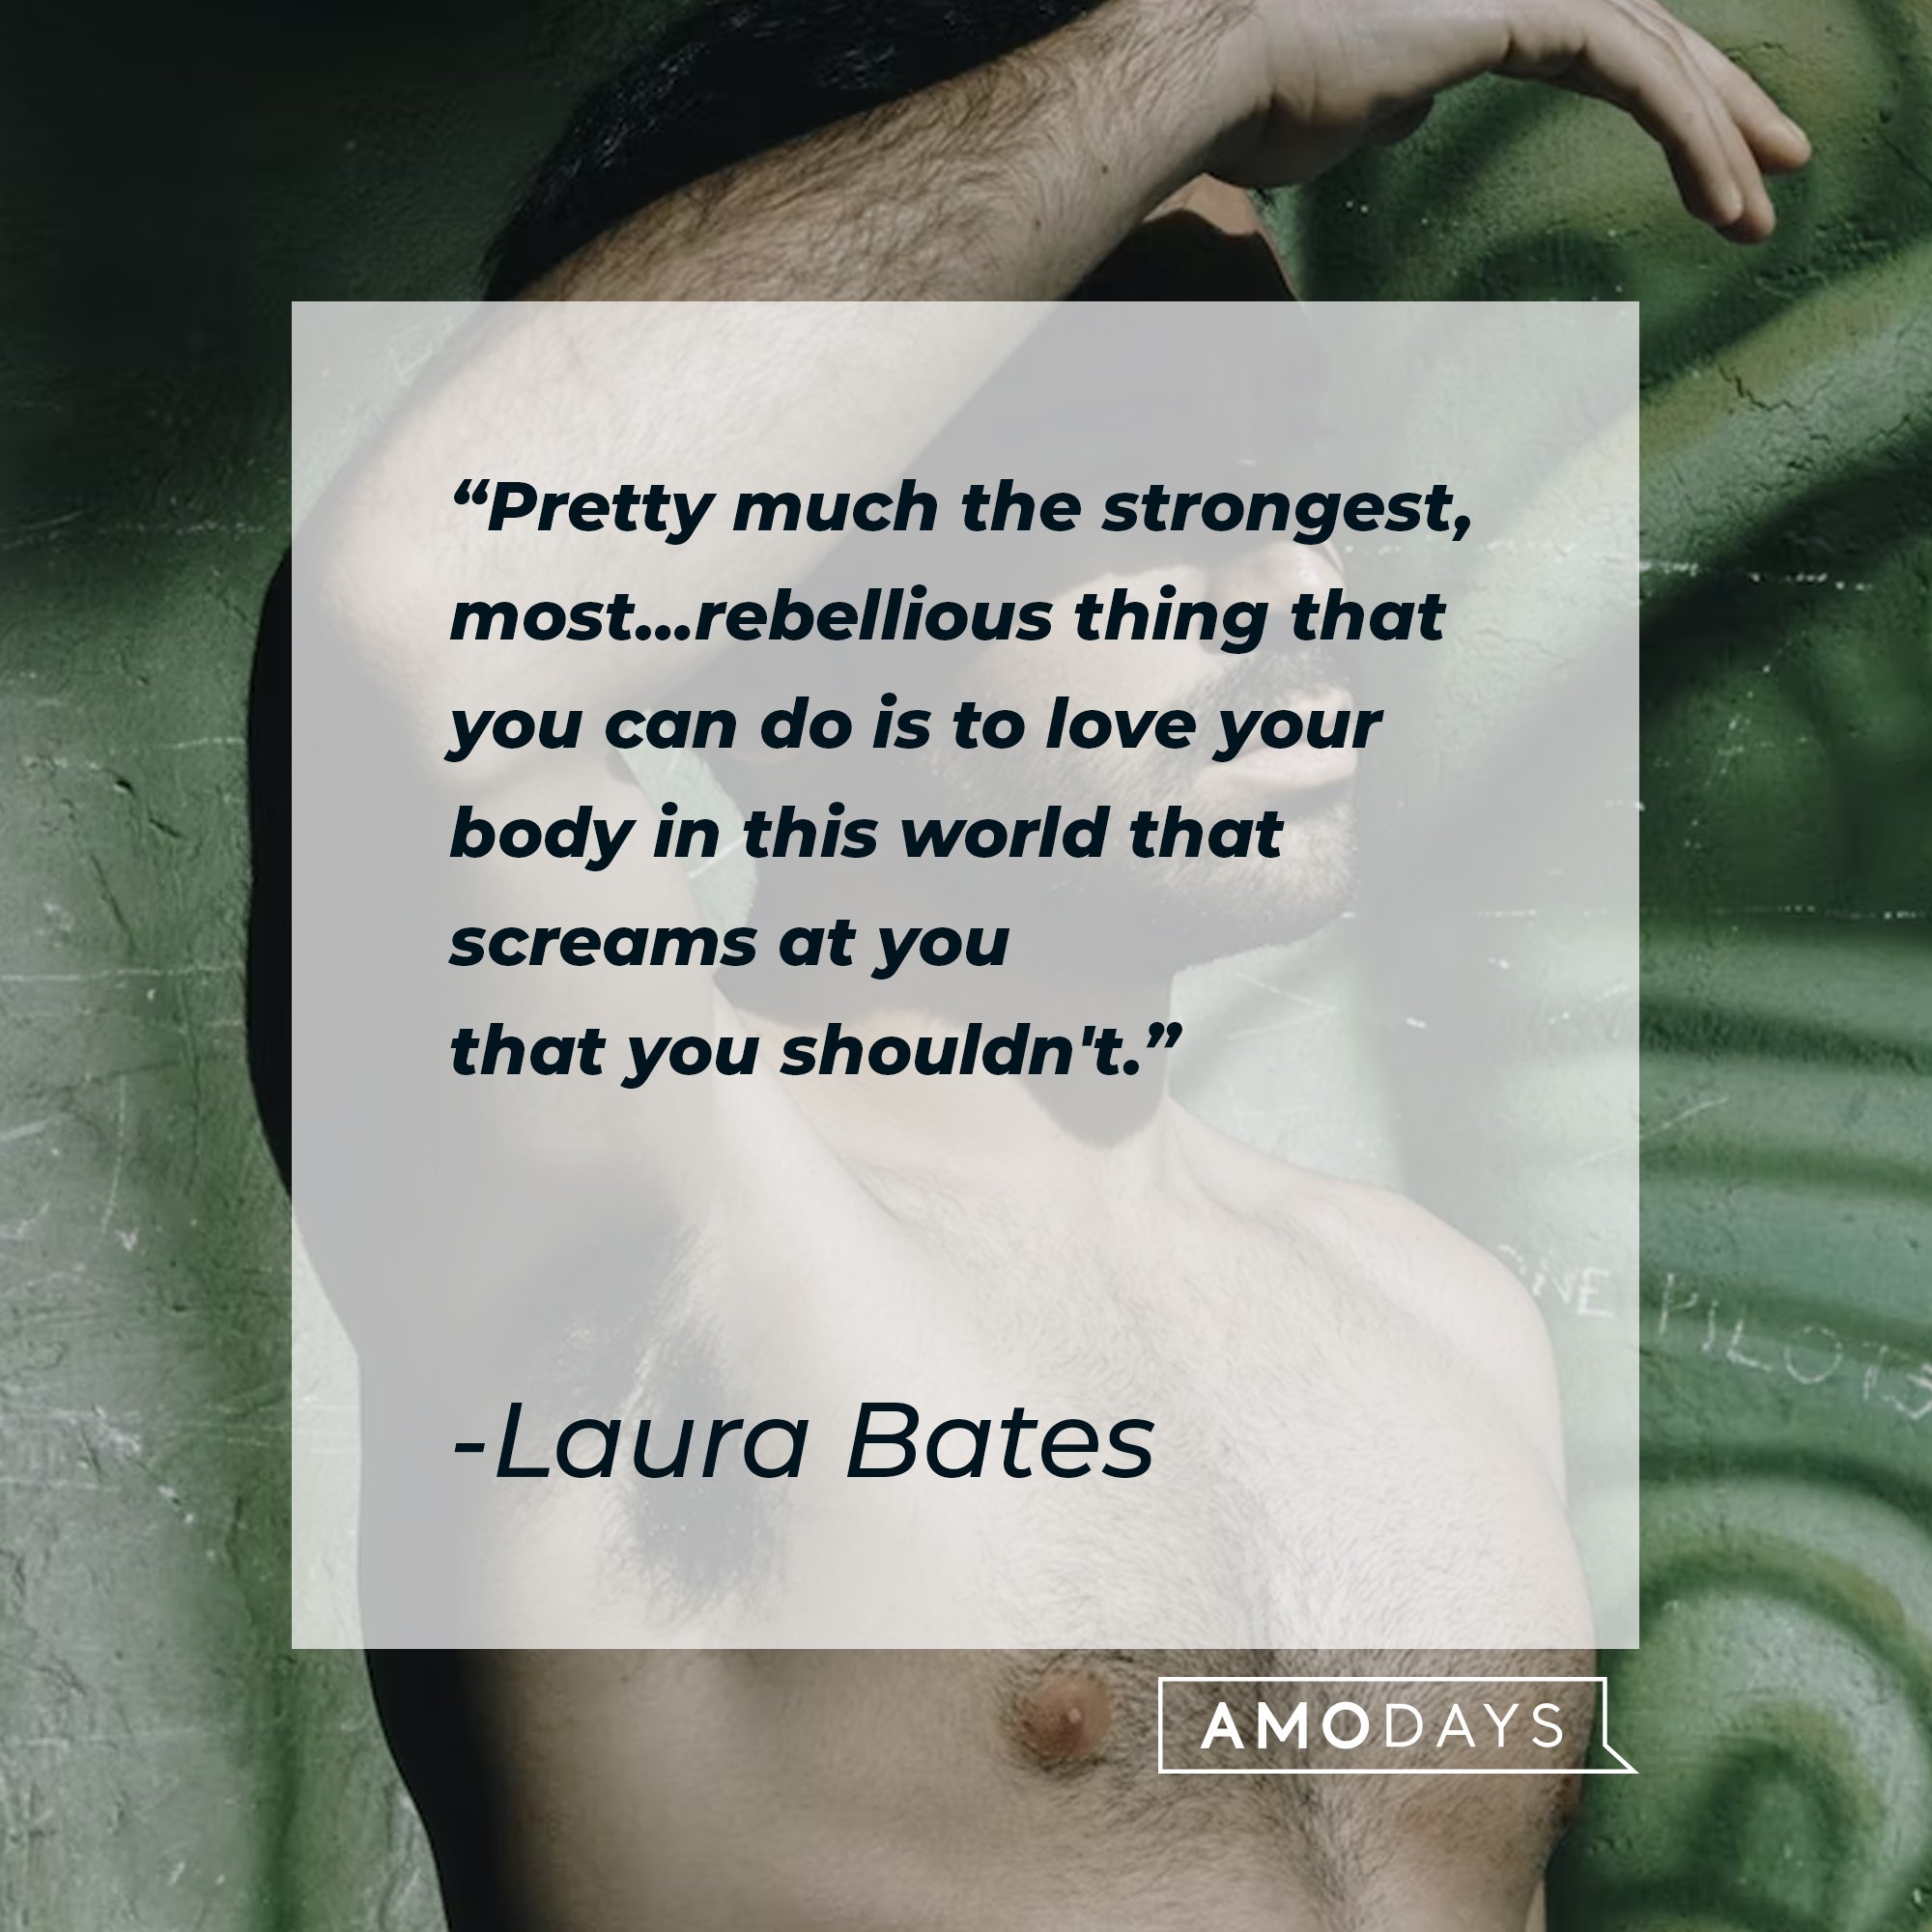 Laura Bates’ quote: "Pretty much the strongest, most…rebellious thing that you can do is to love your body in this world that screams at you that you shouldn't." | Image: AmoDays